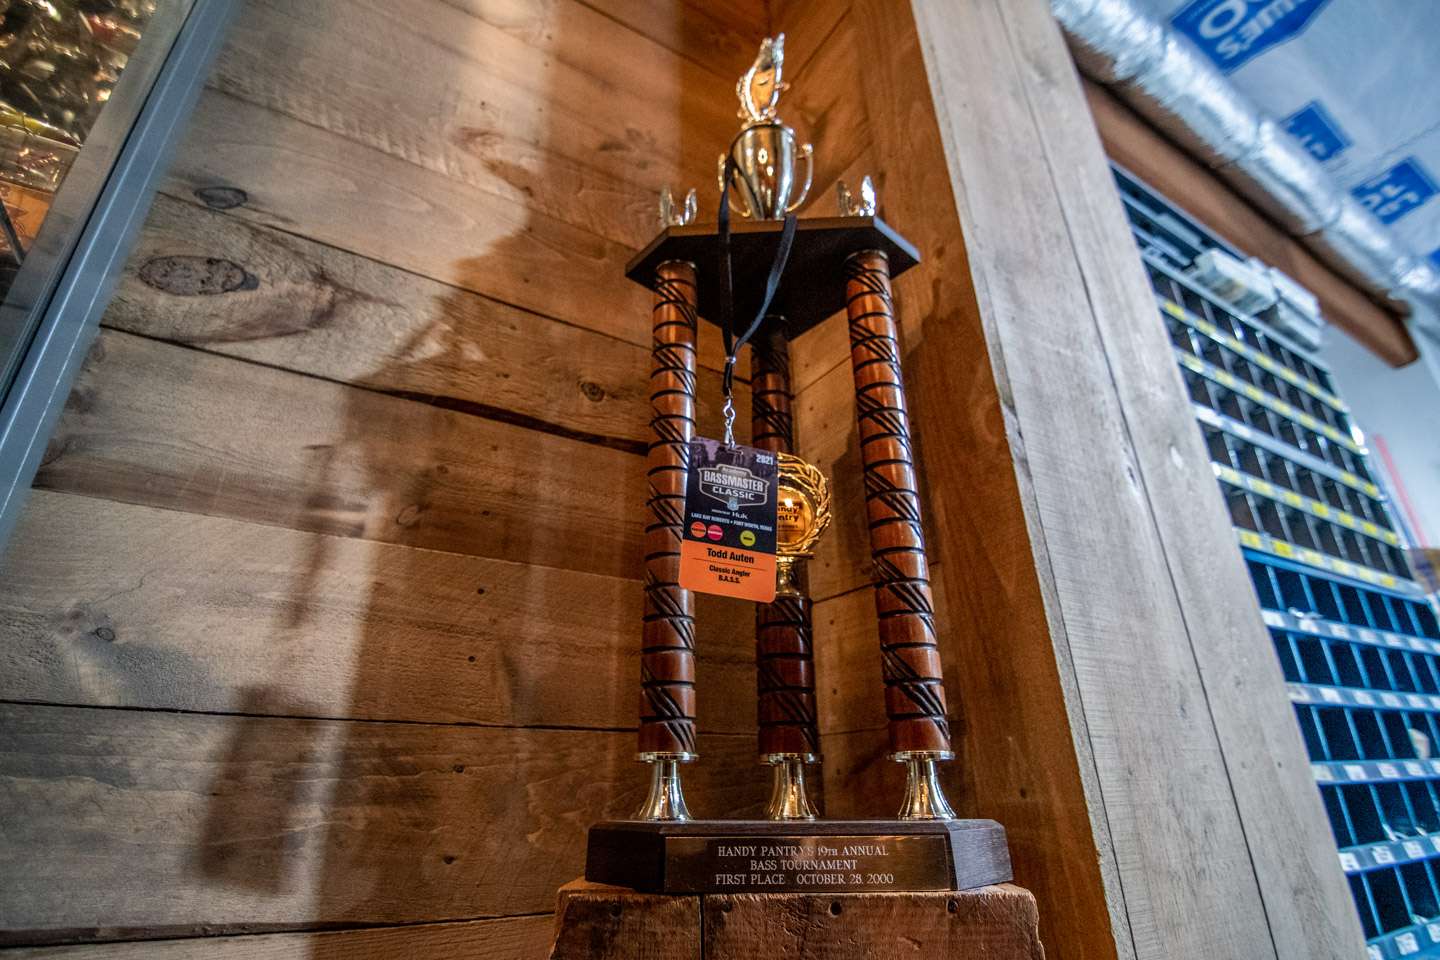 One of Auten’s earlier home lake fishing trophies have a place right next to the entrance of the room. It’s a first-place trophy from an October 2000 derby. 